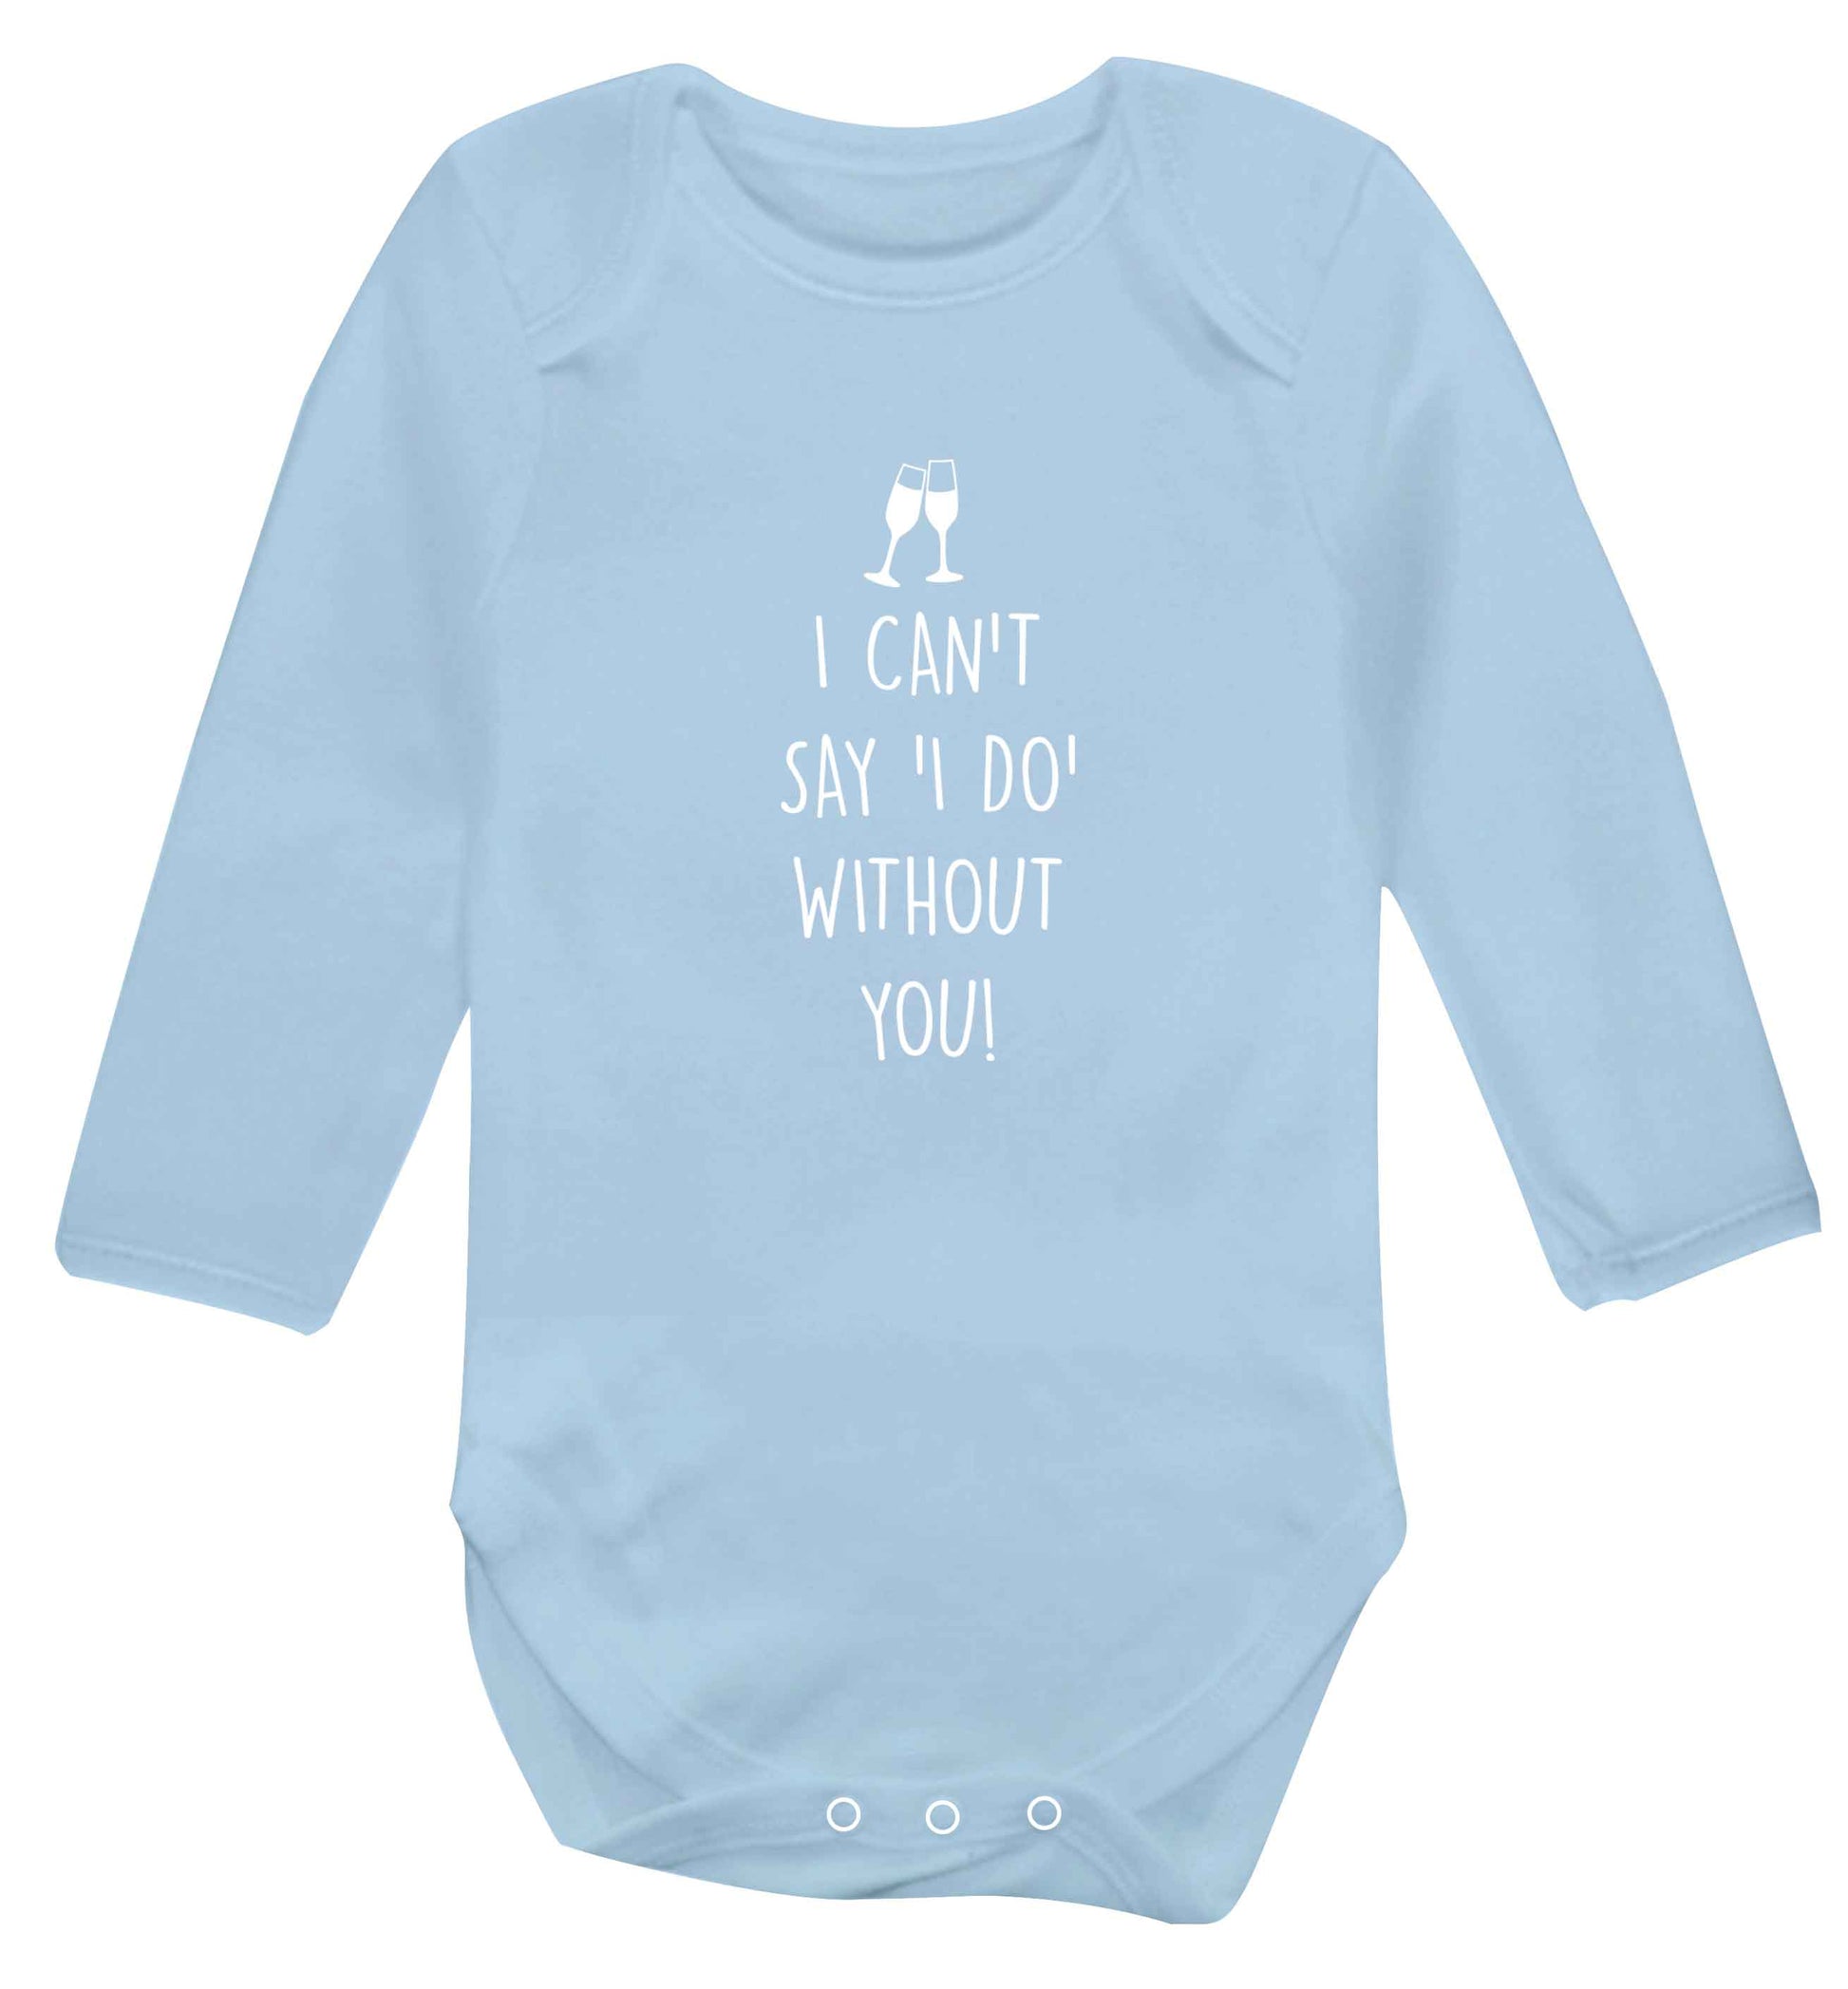 I can't say 'I do' without you! baby vest long sleeved pale blue 6-12 months